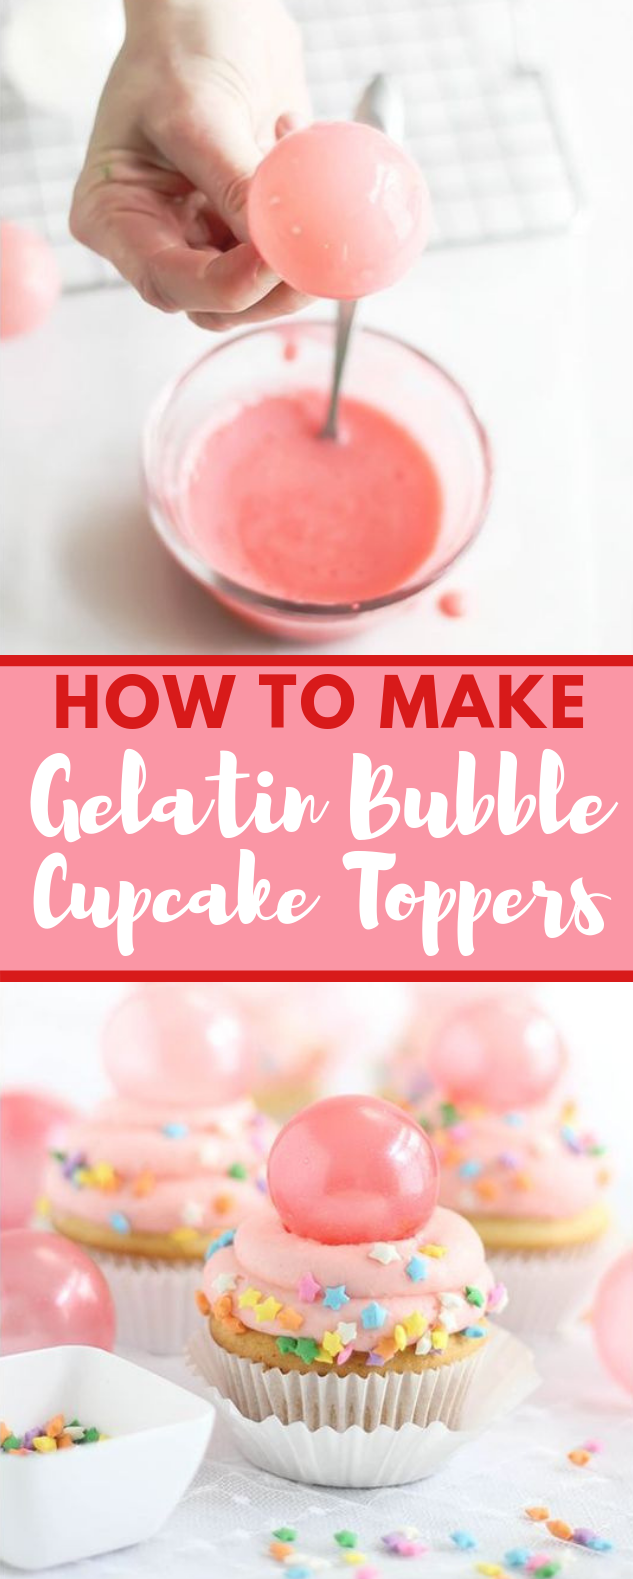 BUBBLE GUM FROSTING CUPCAKES WITH GELATIN BUBBLES #desserts #cake